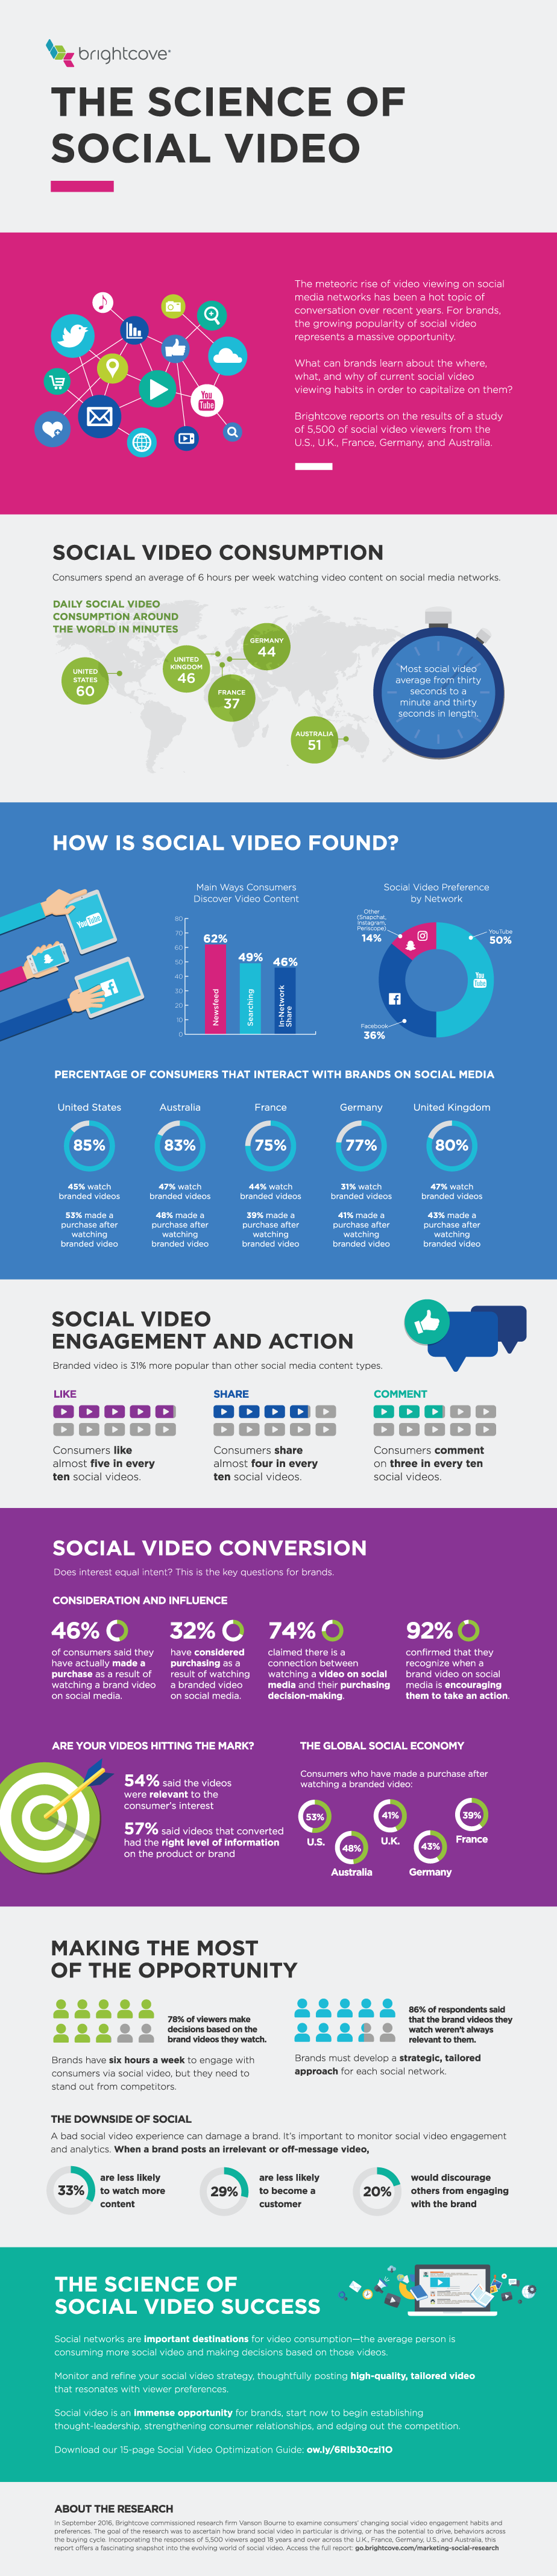 The Science of Social Video - #Infographic